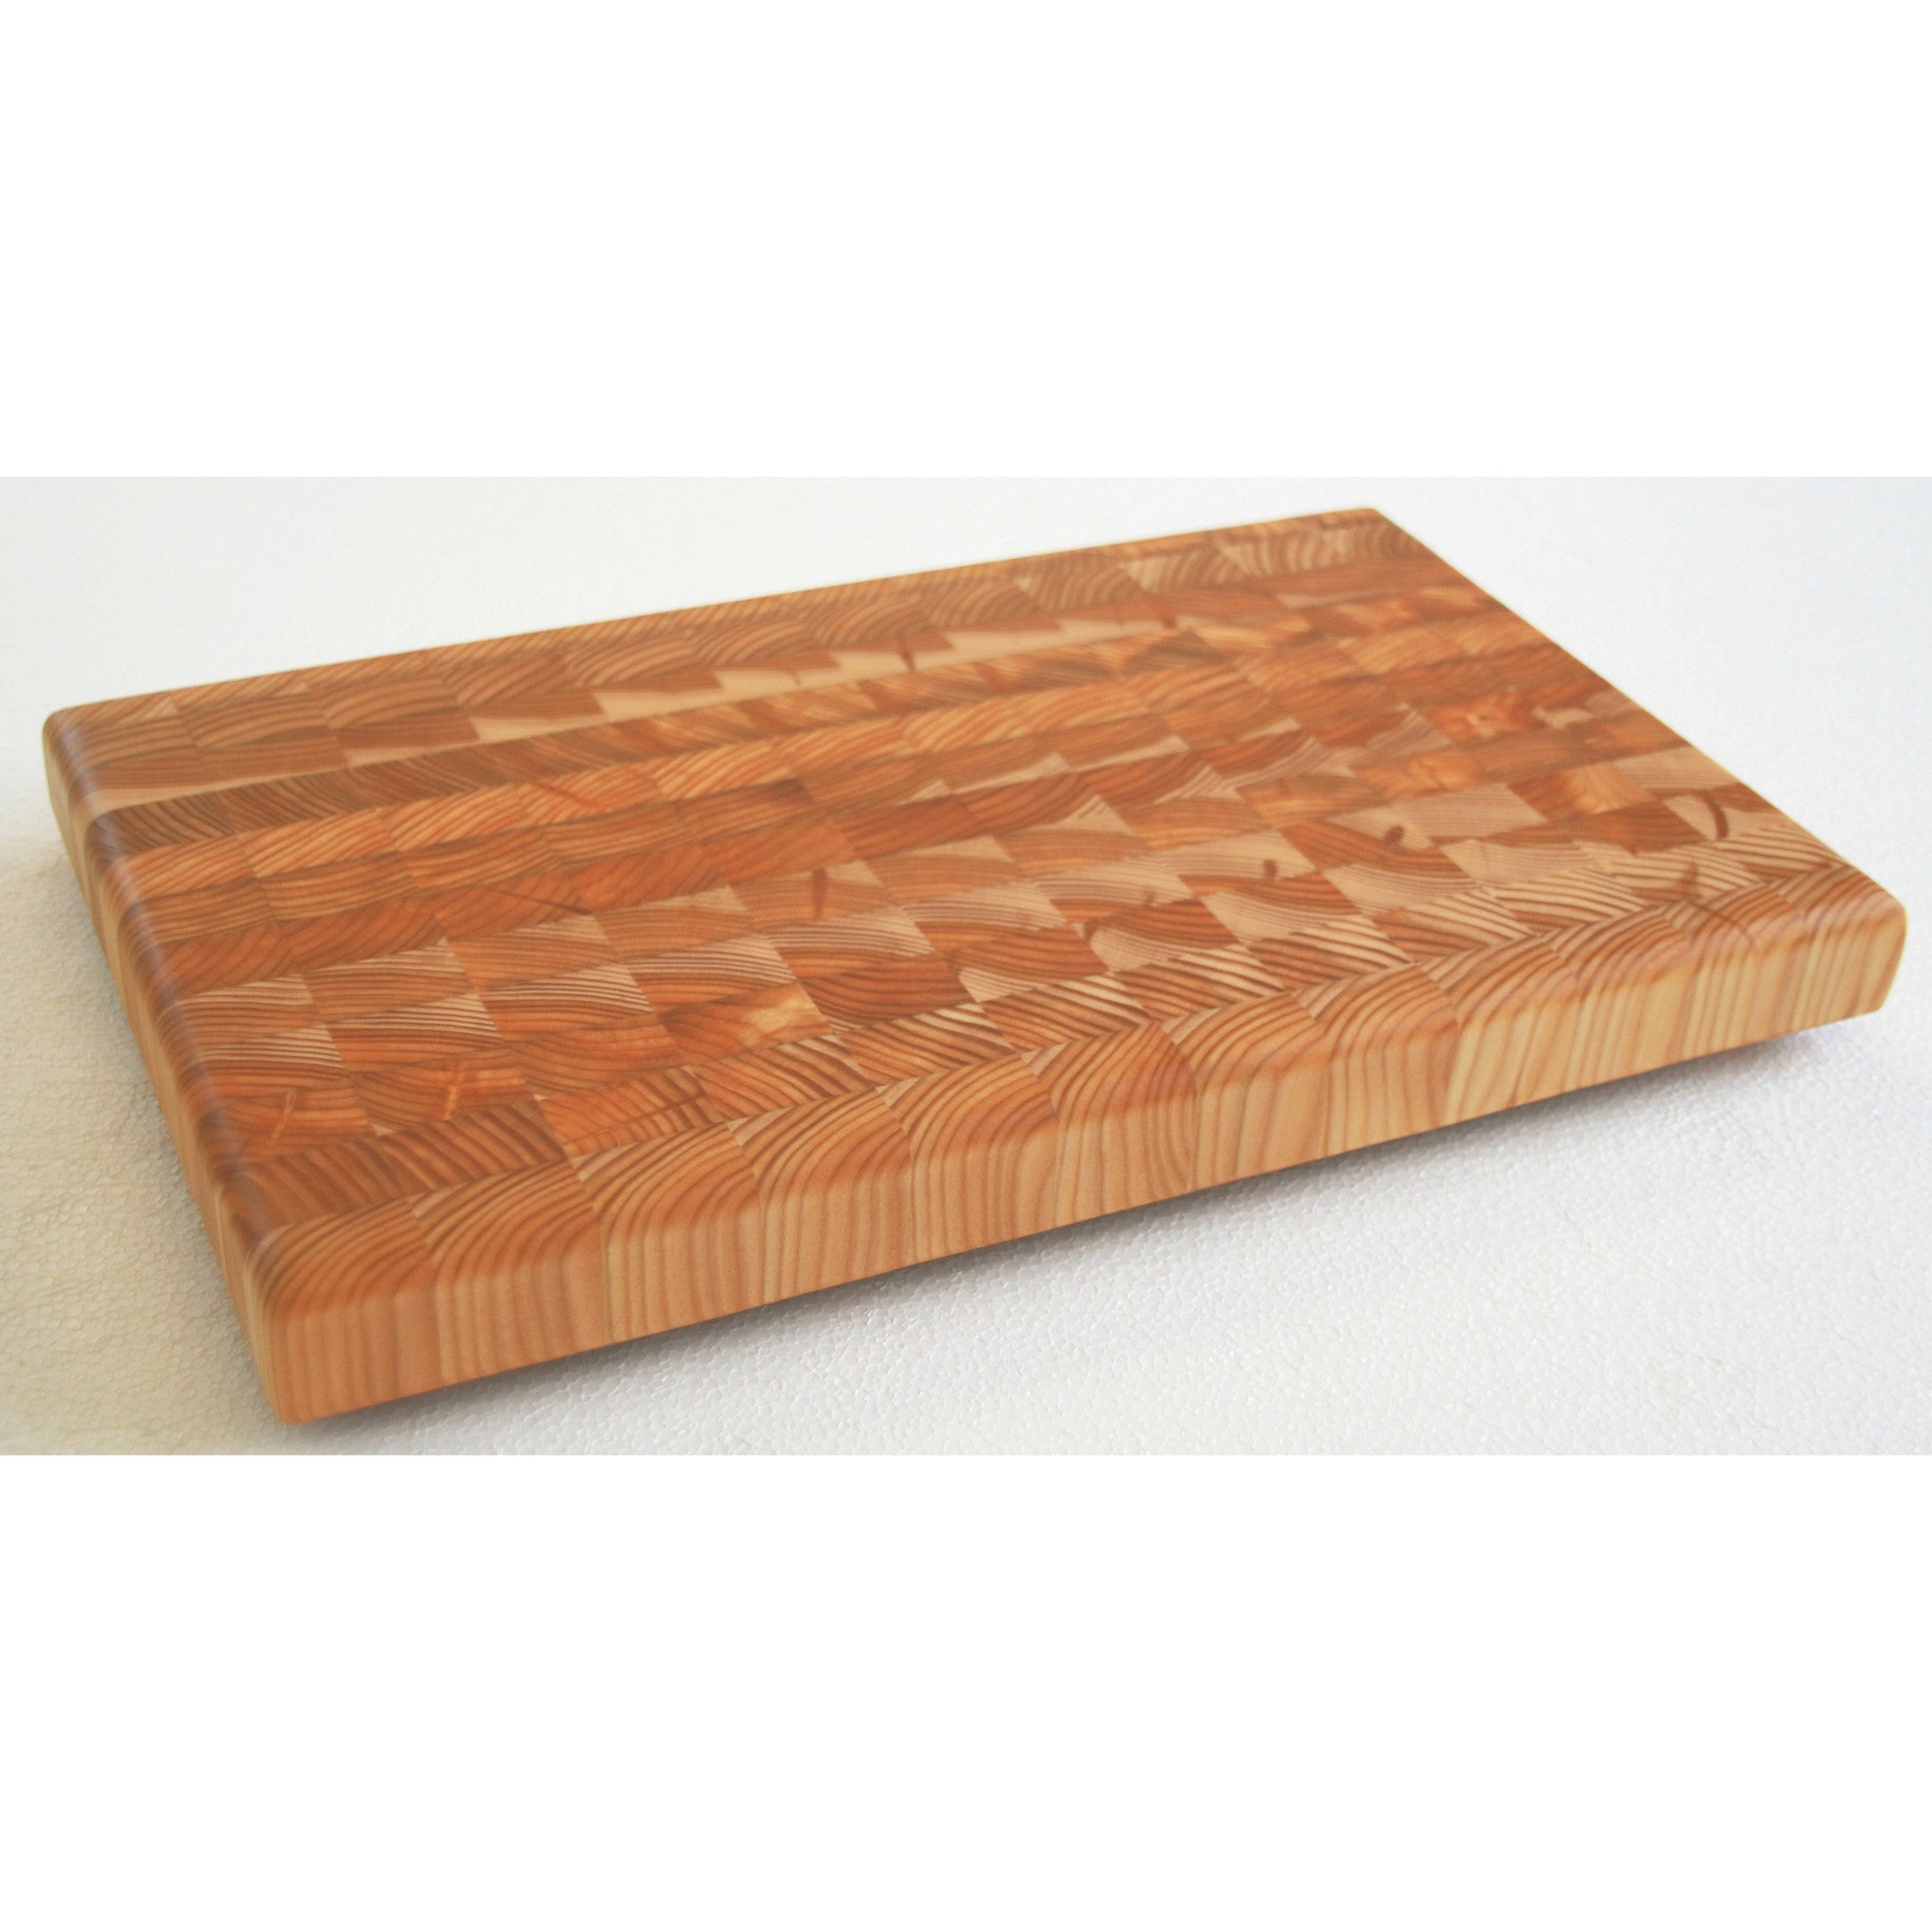 How to Care for Your Wooden Cutting Board (Larch & More)